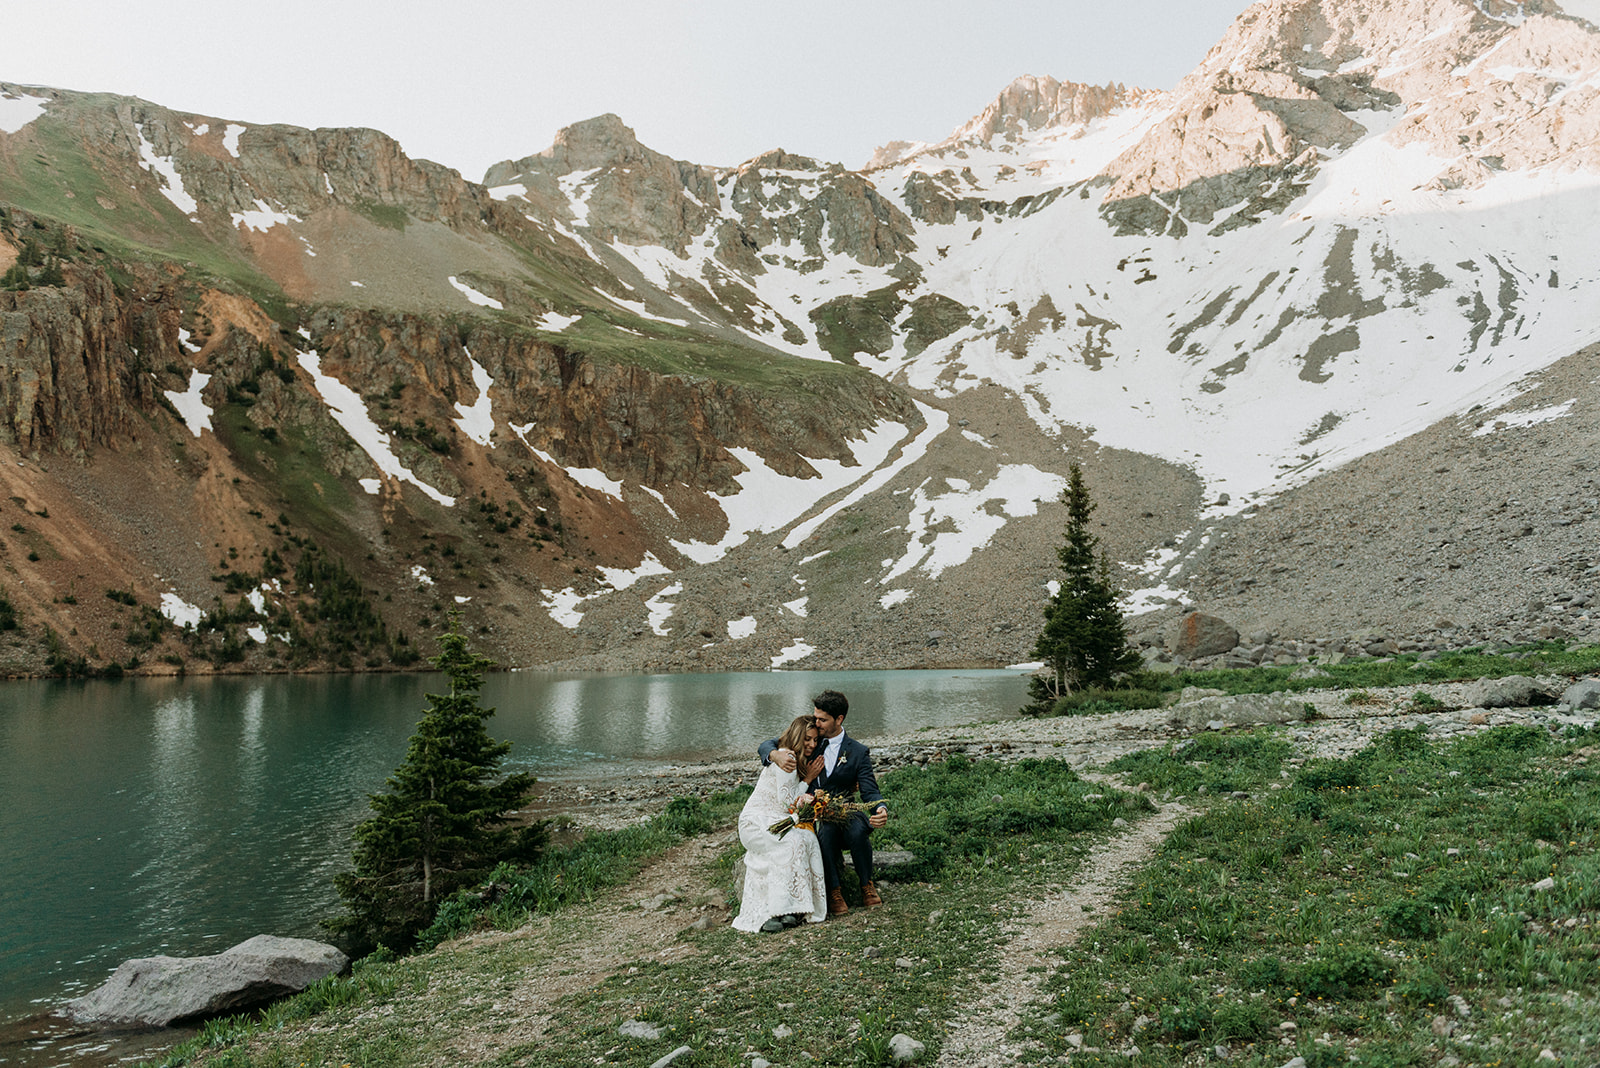 couple snuggling around an alpine lake on their Alaskan elopement adventure, in one of the best places ever to elope!